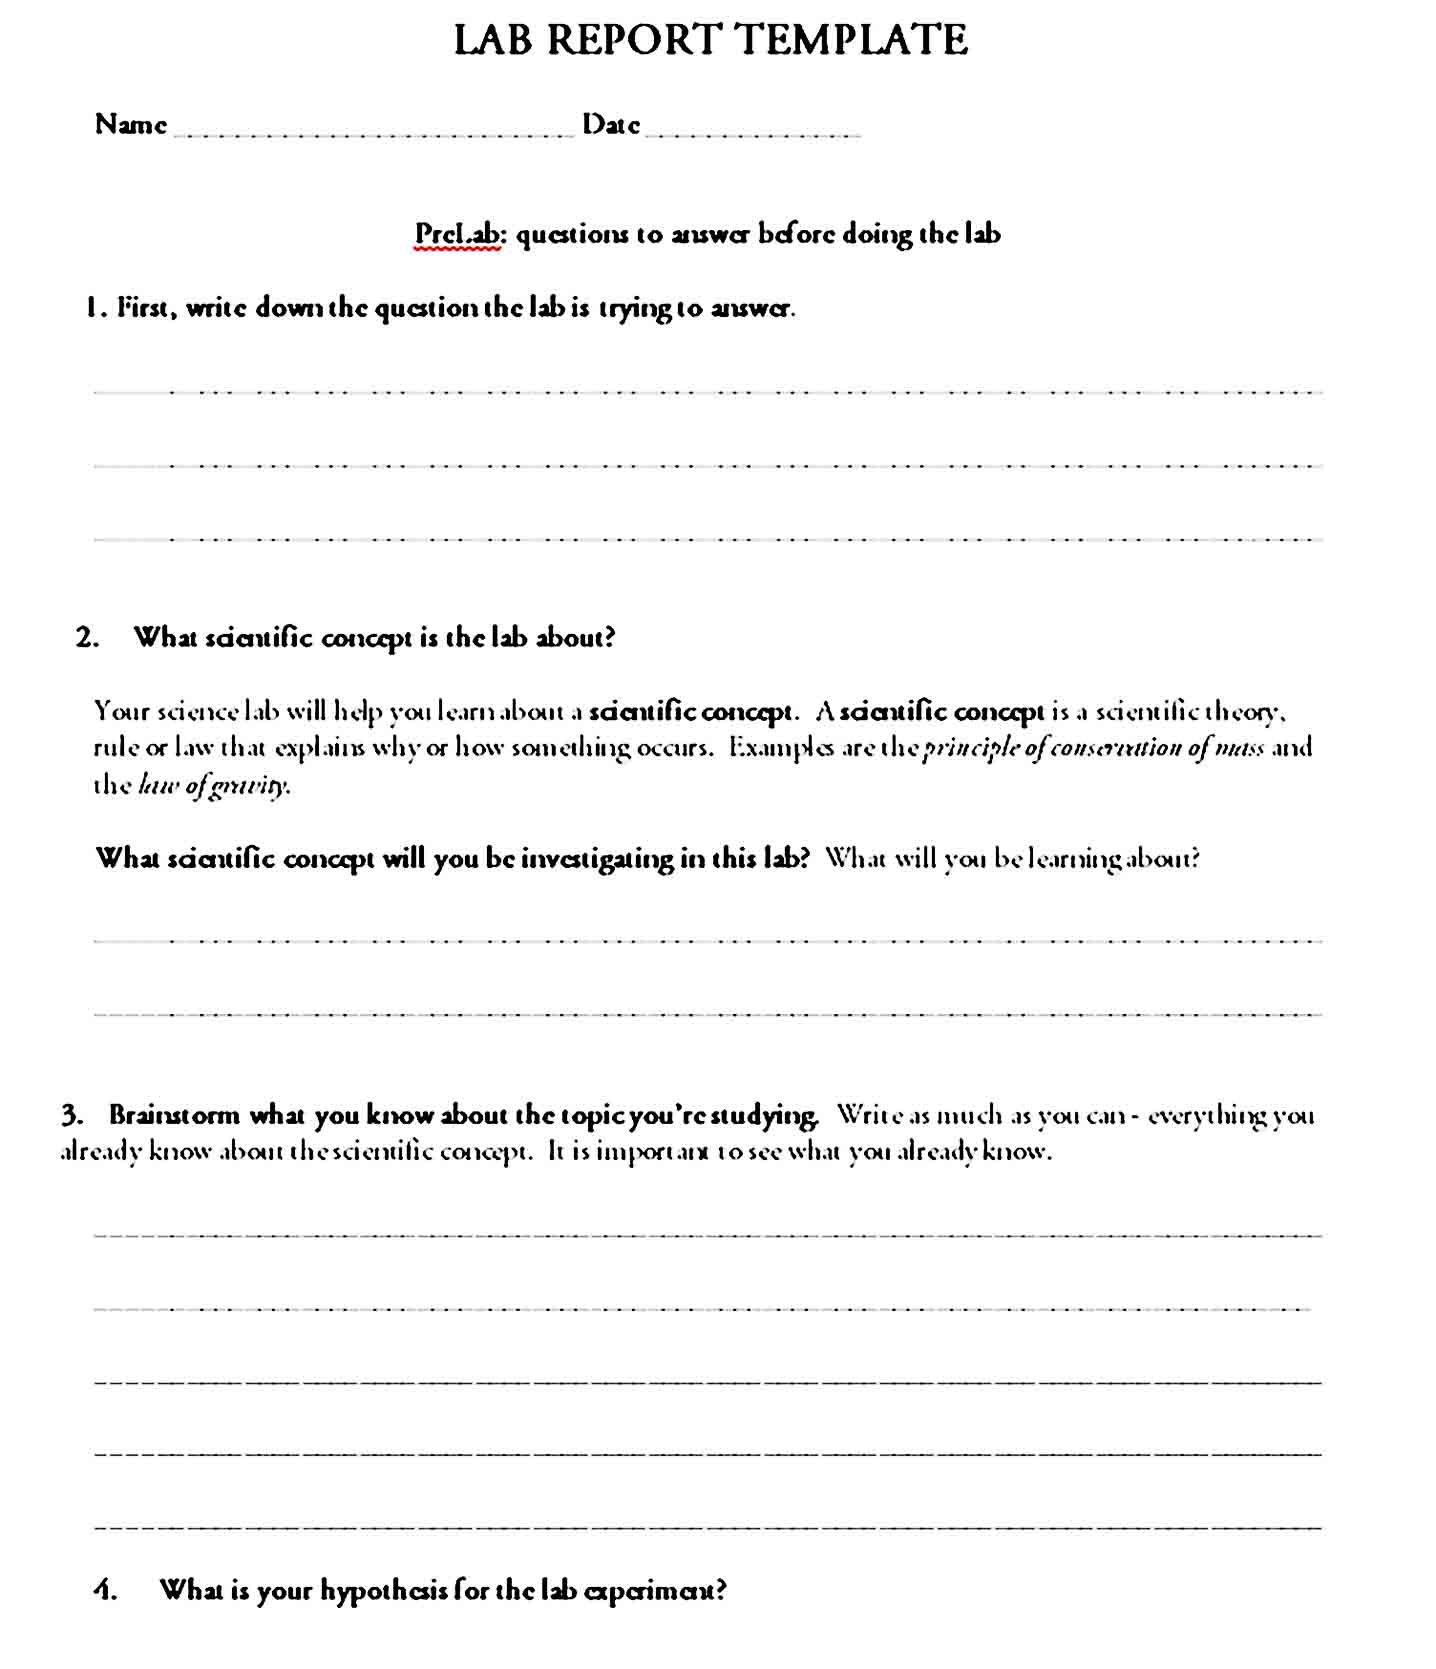 lab report template 03